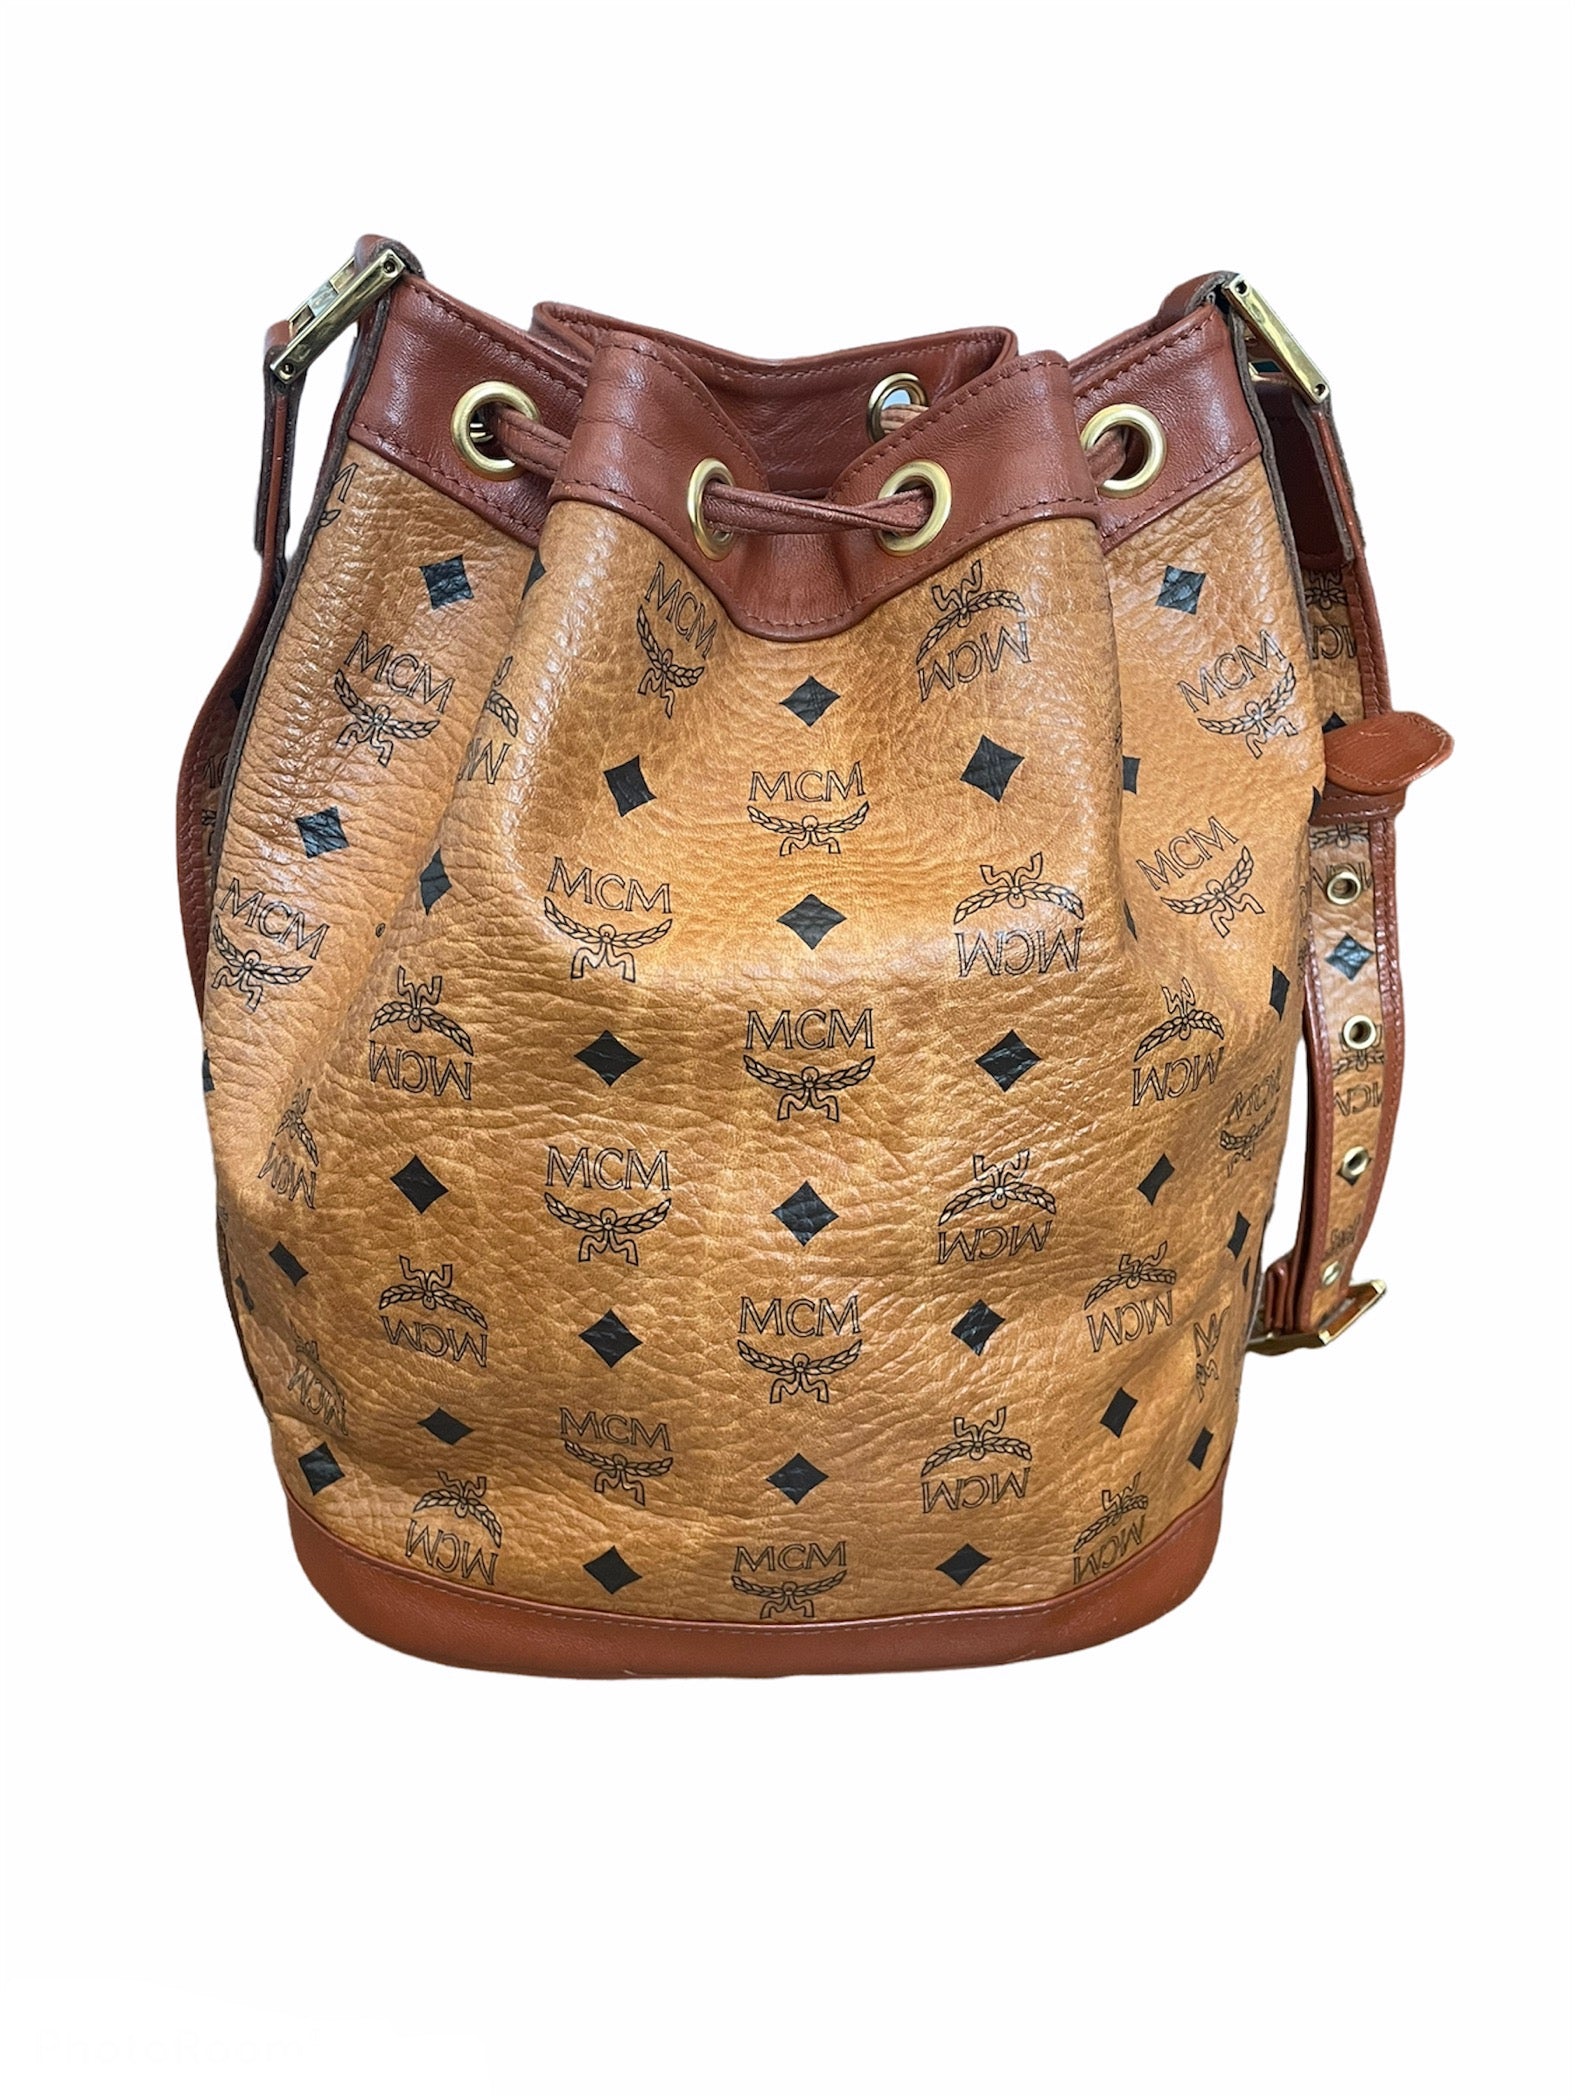 Mcm Bucket Bag, Shop The Largest Collection